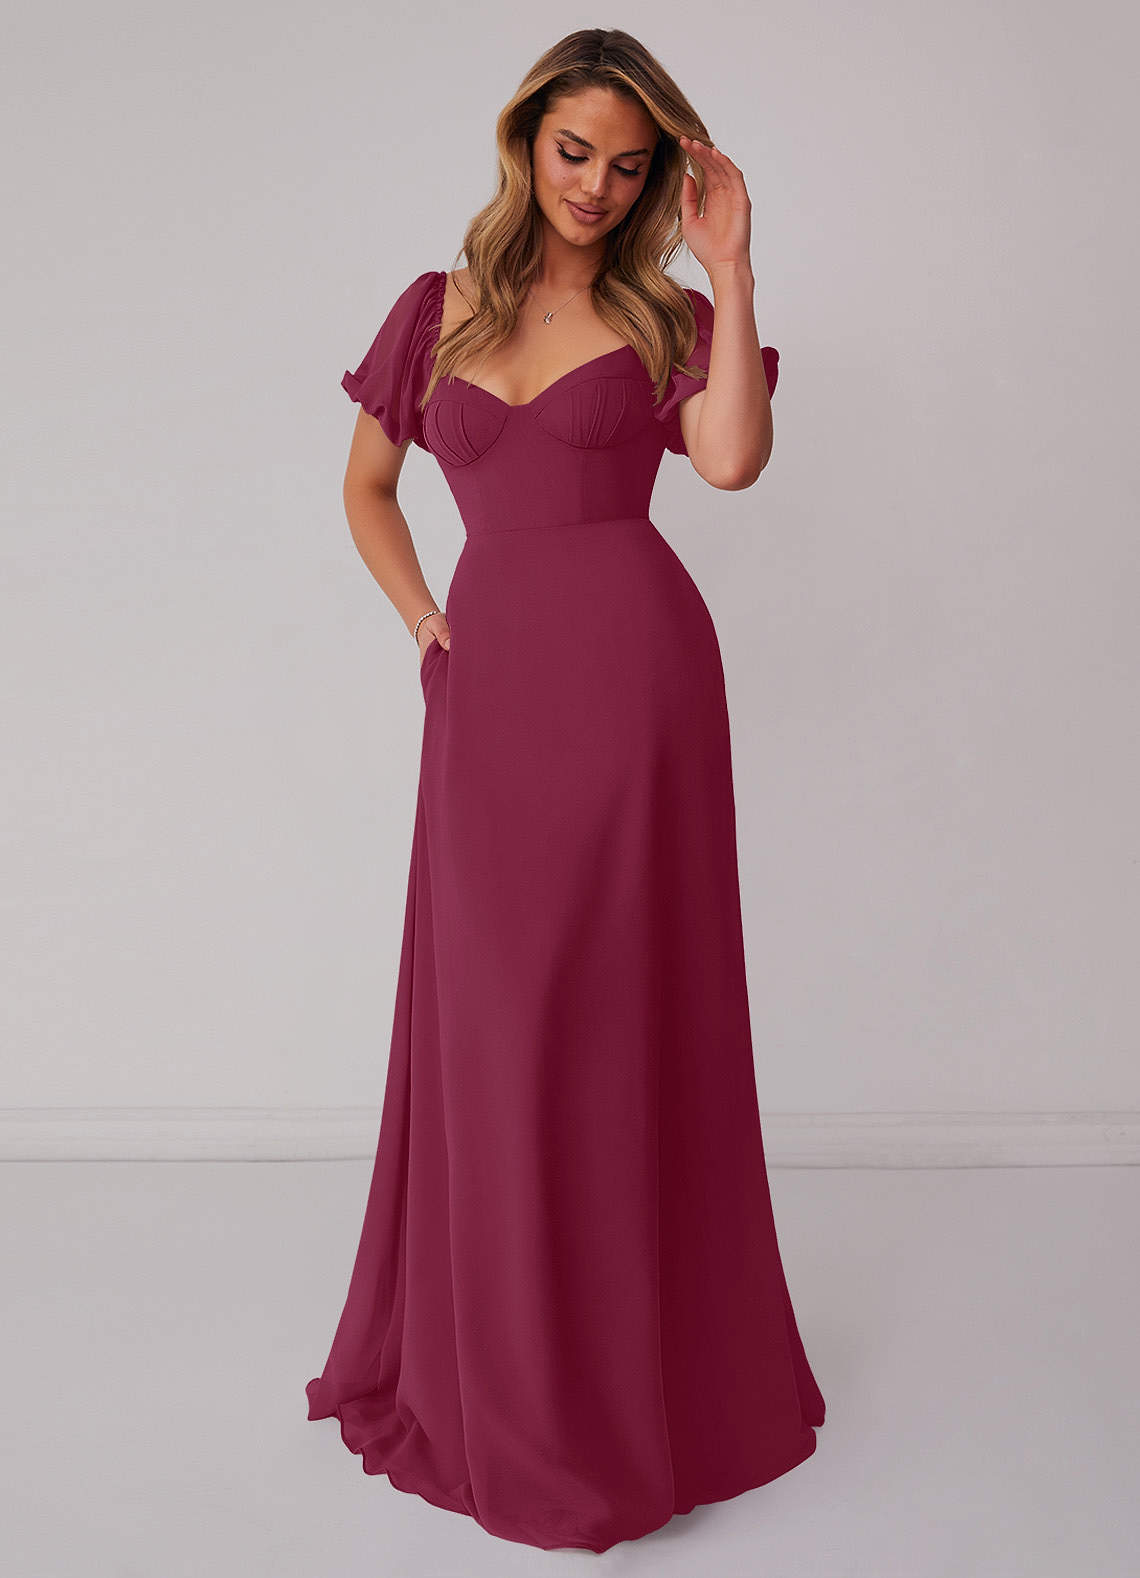 Mulberry Chiffon A-line Dress with Puff Sleeves Bridesmaid Dresses | Azazie